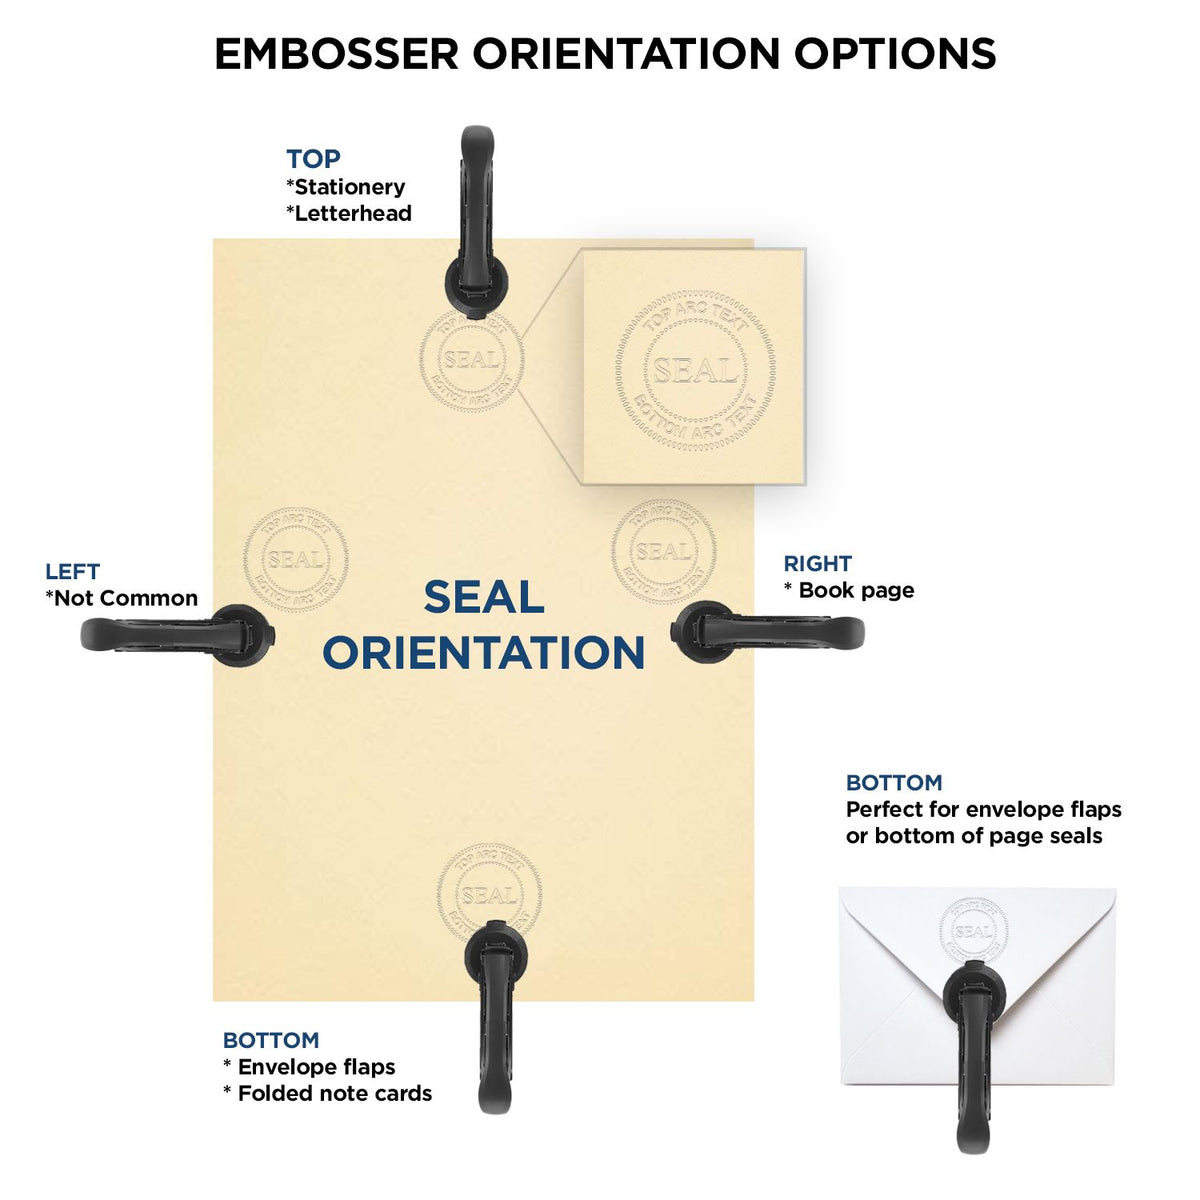 An infographic for the Gift Virginia Engineer Seal showing embosser orientation, this is showing examples of a top, bottom, right and left insert.